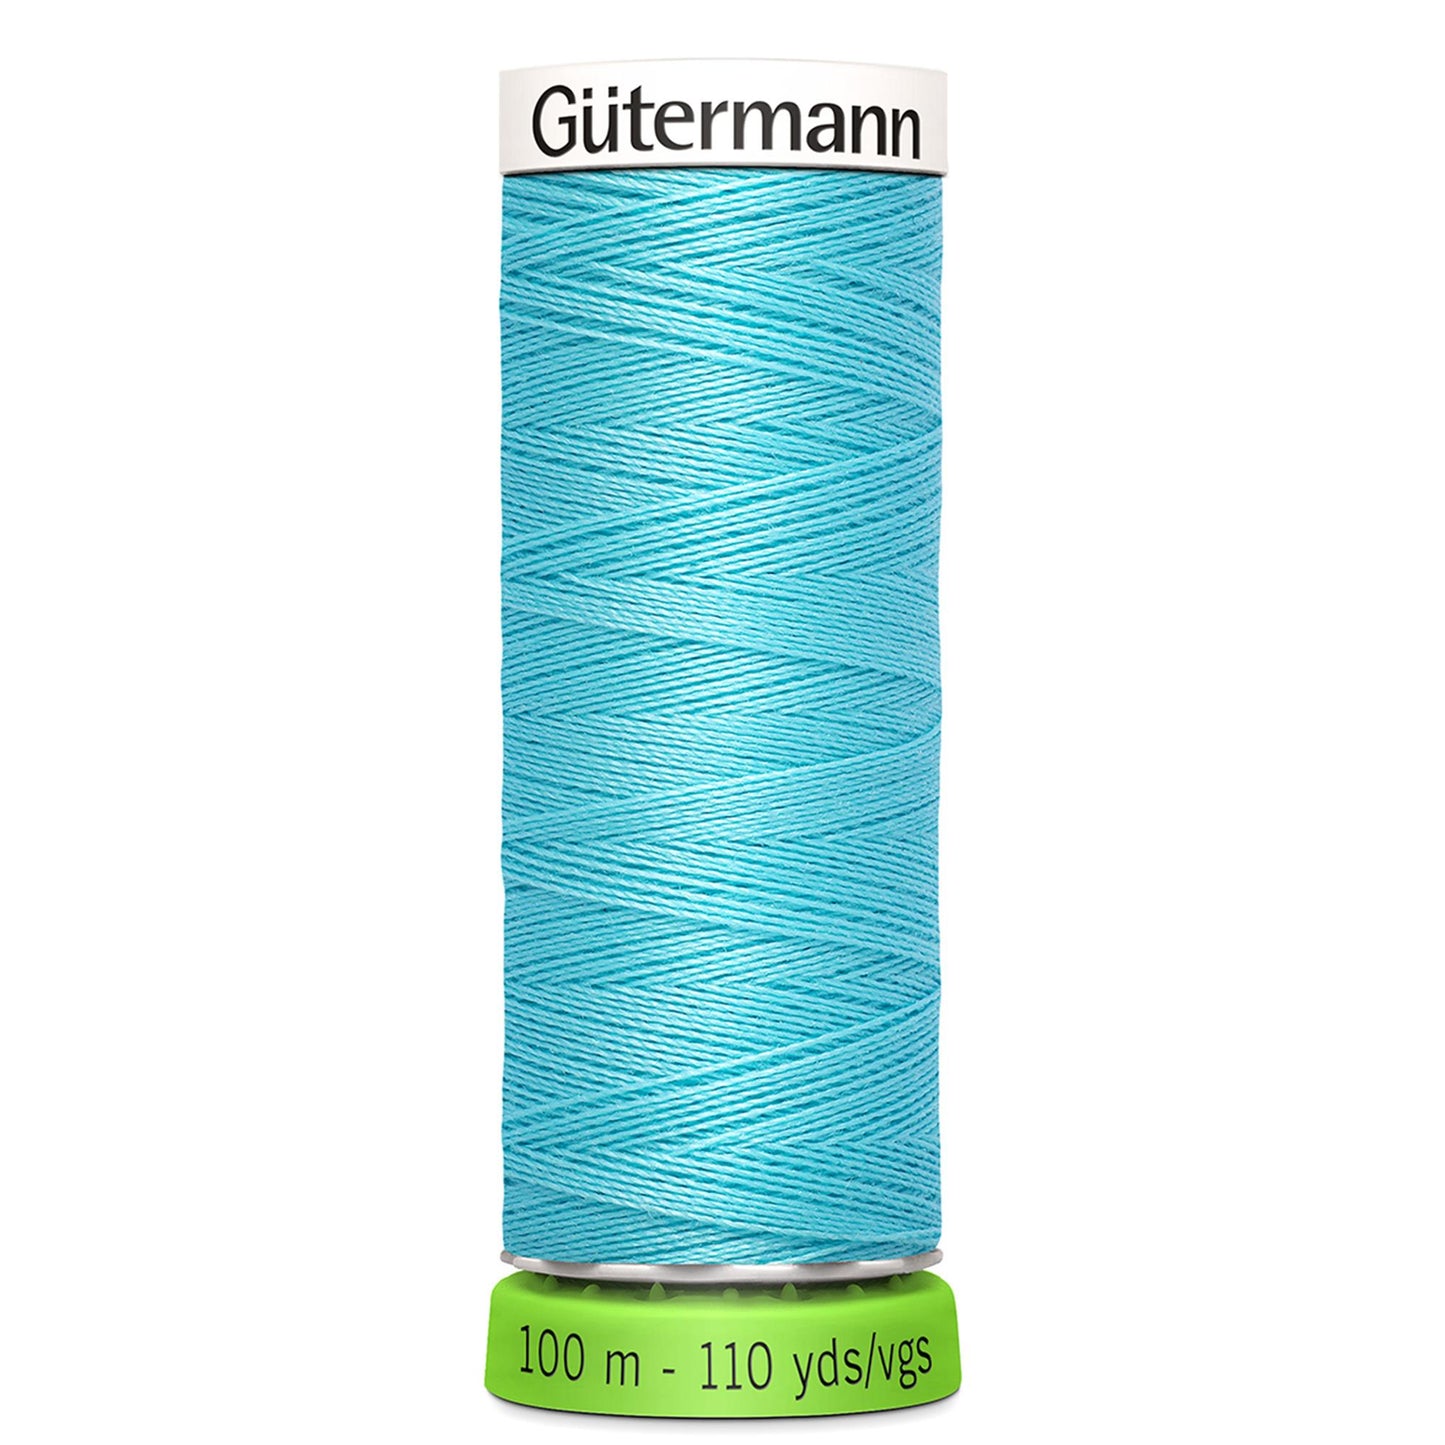 Gütermann rPet (100% Recycled) Sew-All Thread 100m - Col. 28 - Cruise Blue